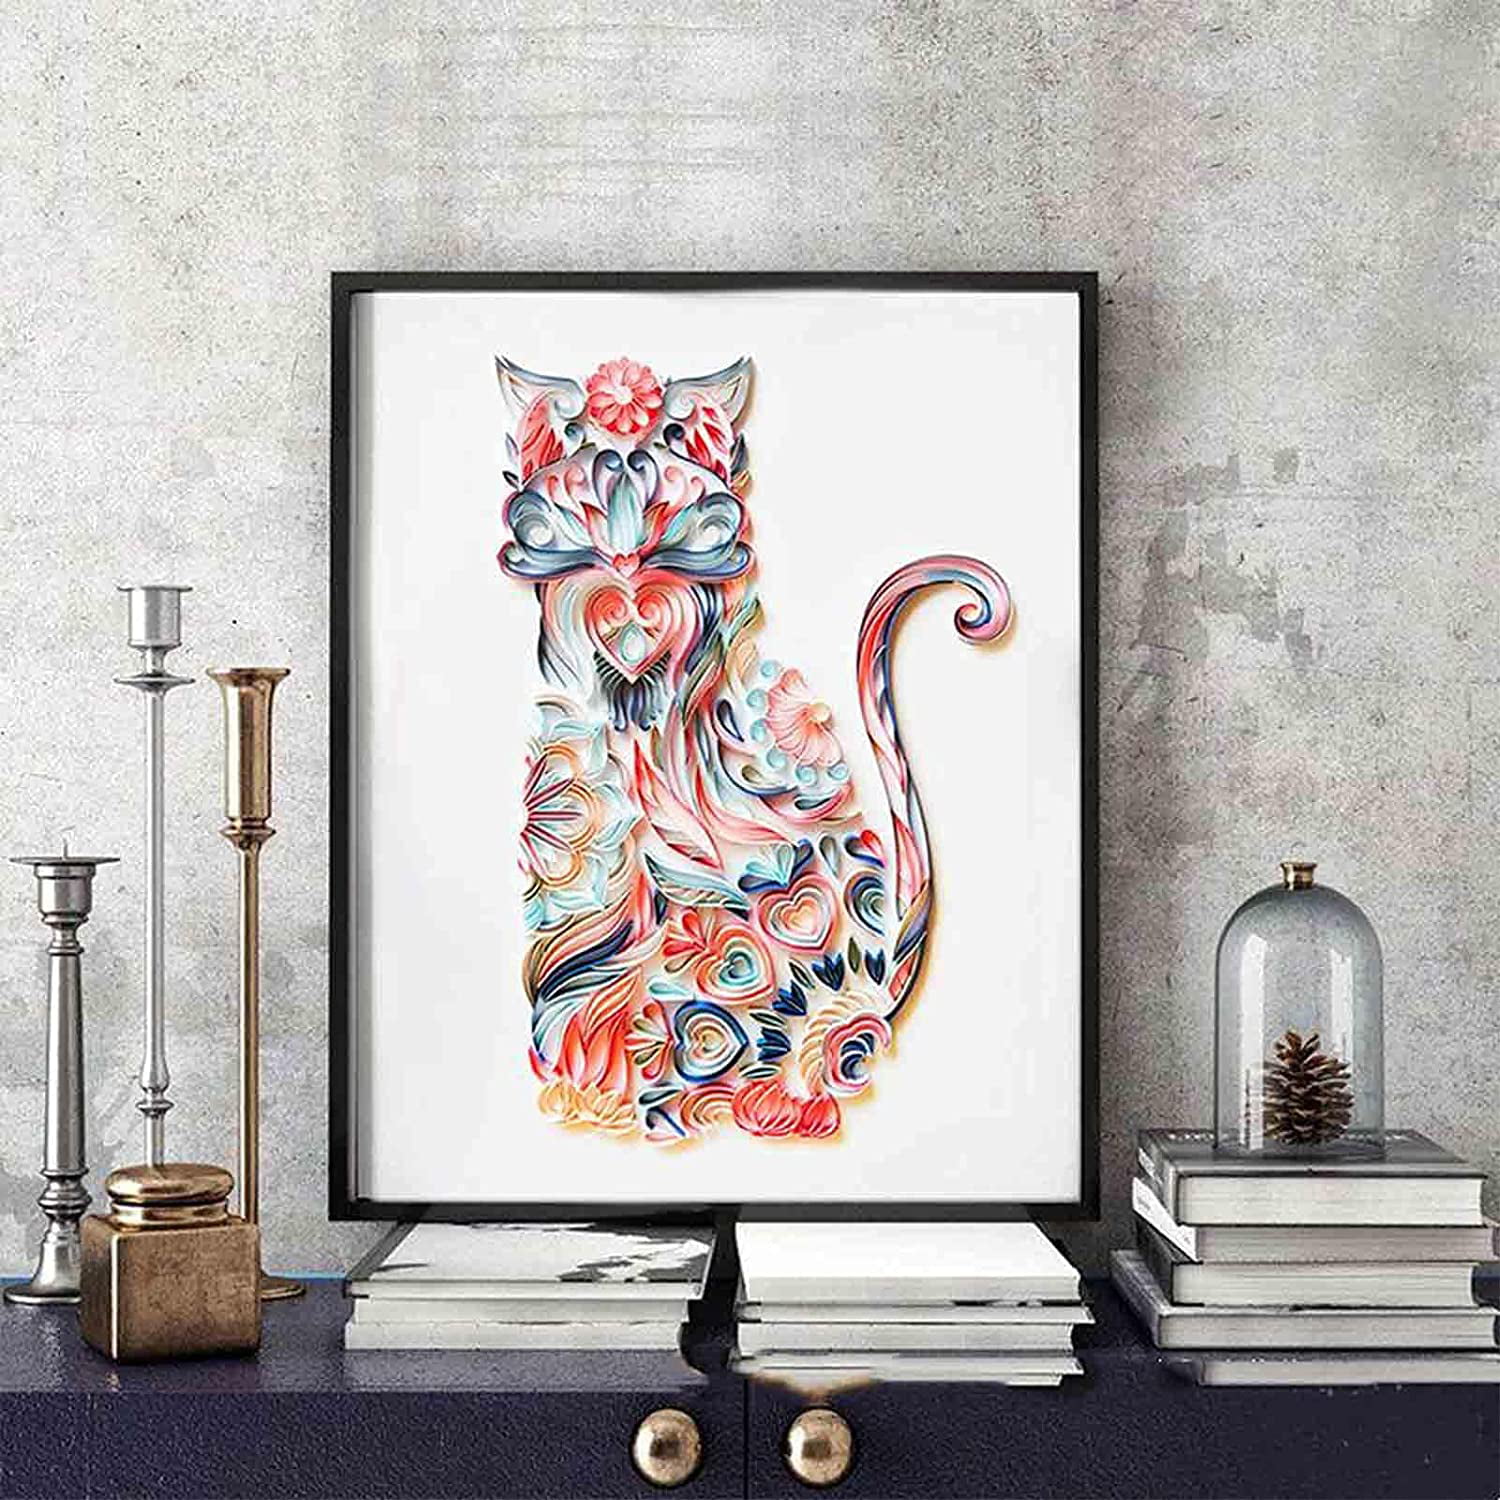 20 * 16 inch with Paper Quilling Kit Tools and EVA Pattern Board × 1 Cat Paper Filigree Painting Paint Kit DIY Handmade Blumuze Quilling Paper Painting Kit for Adults Beginners